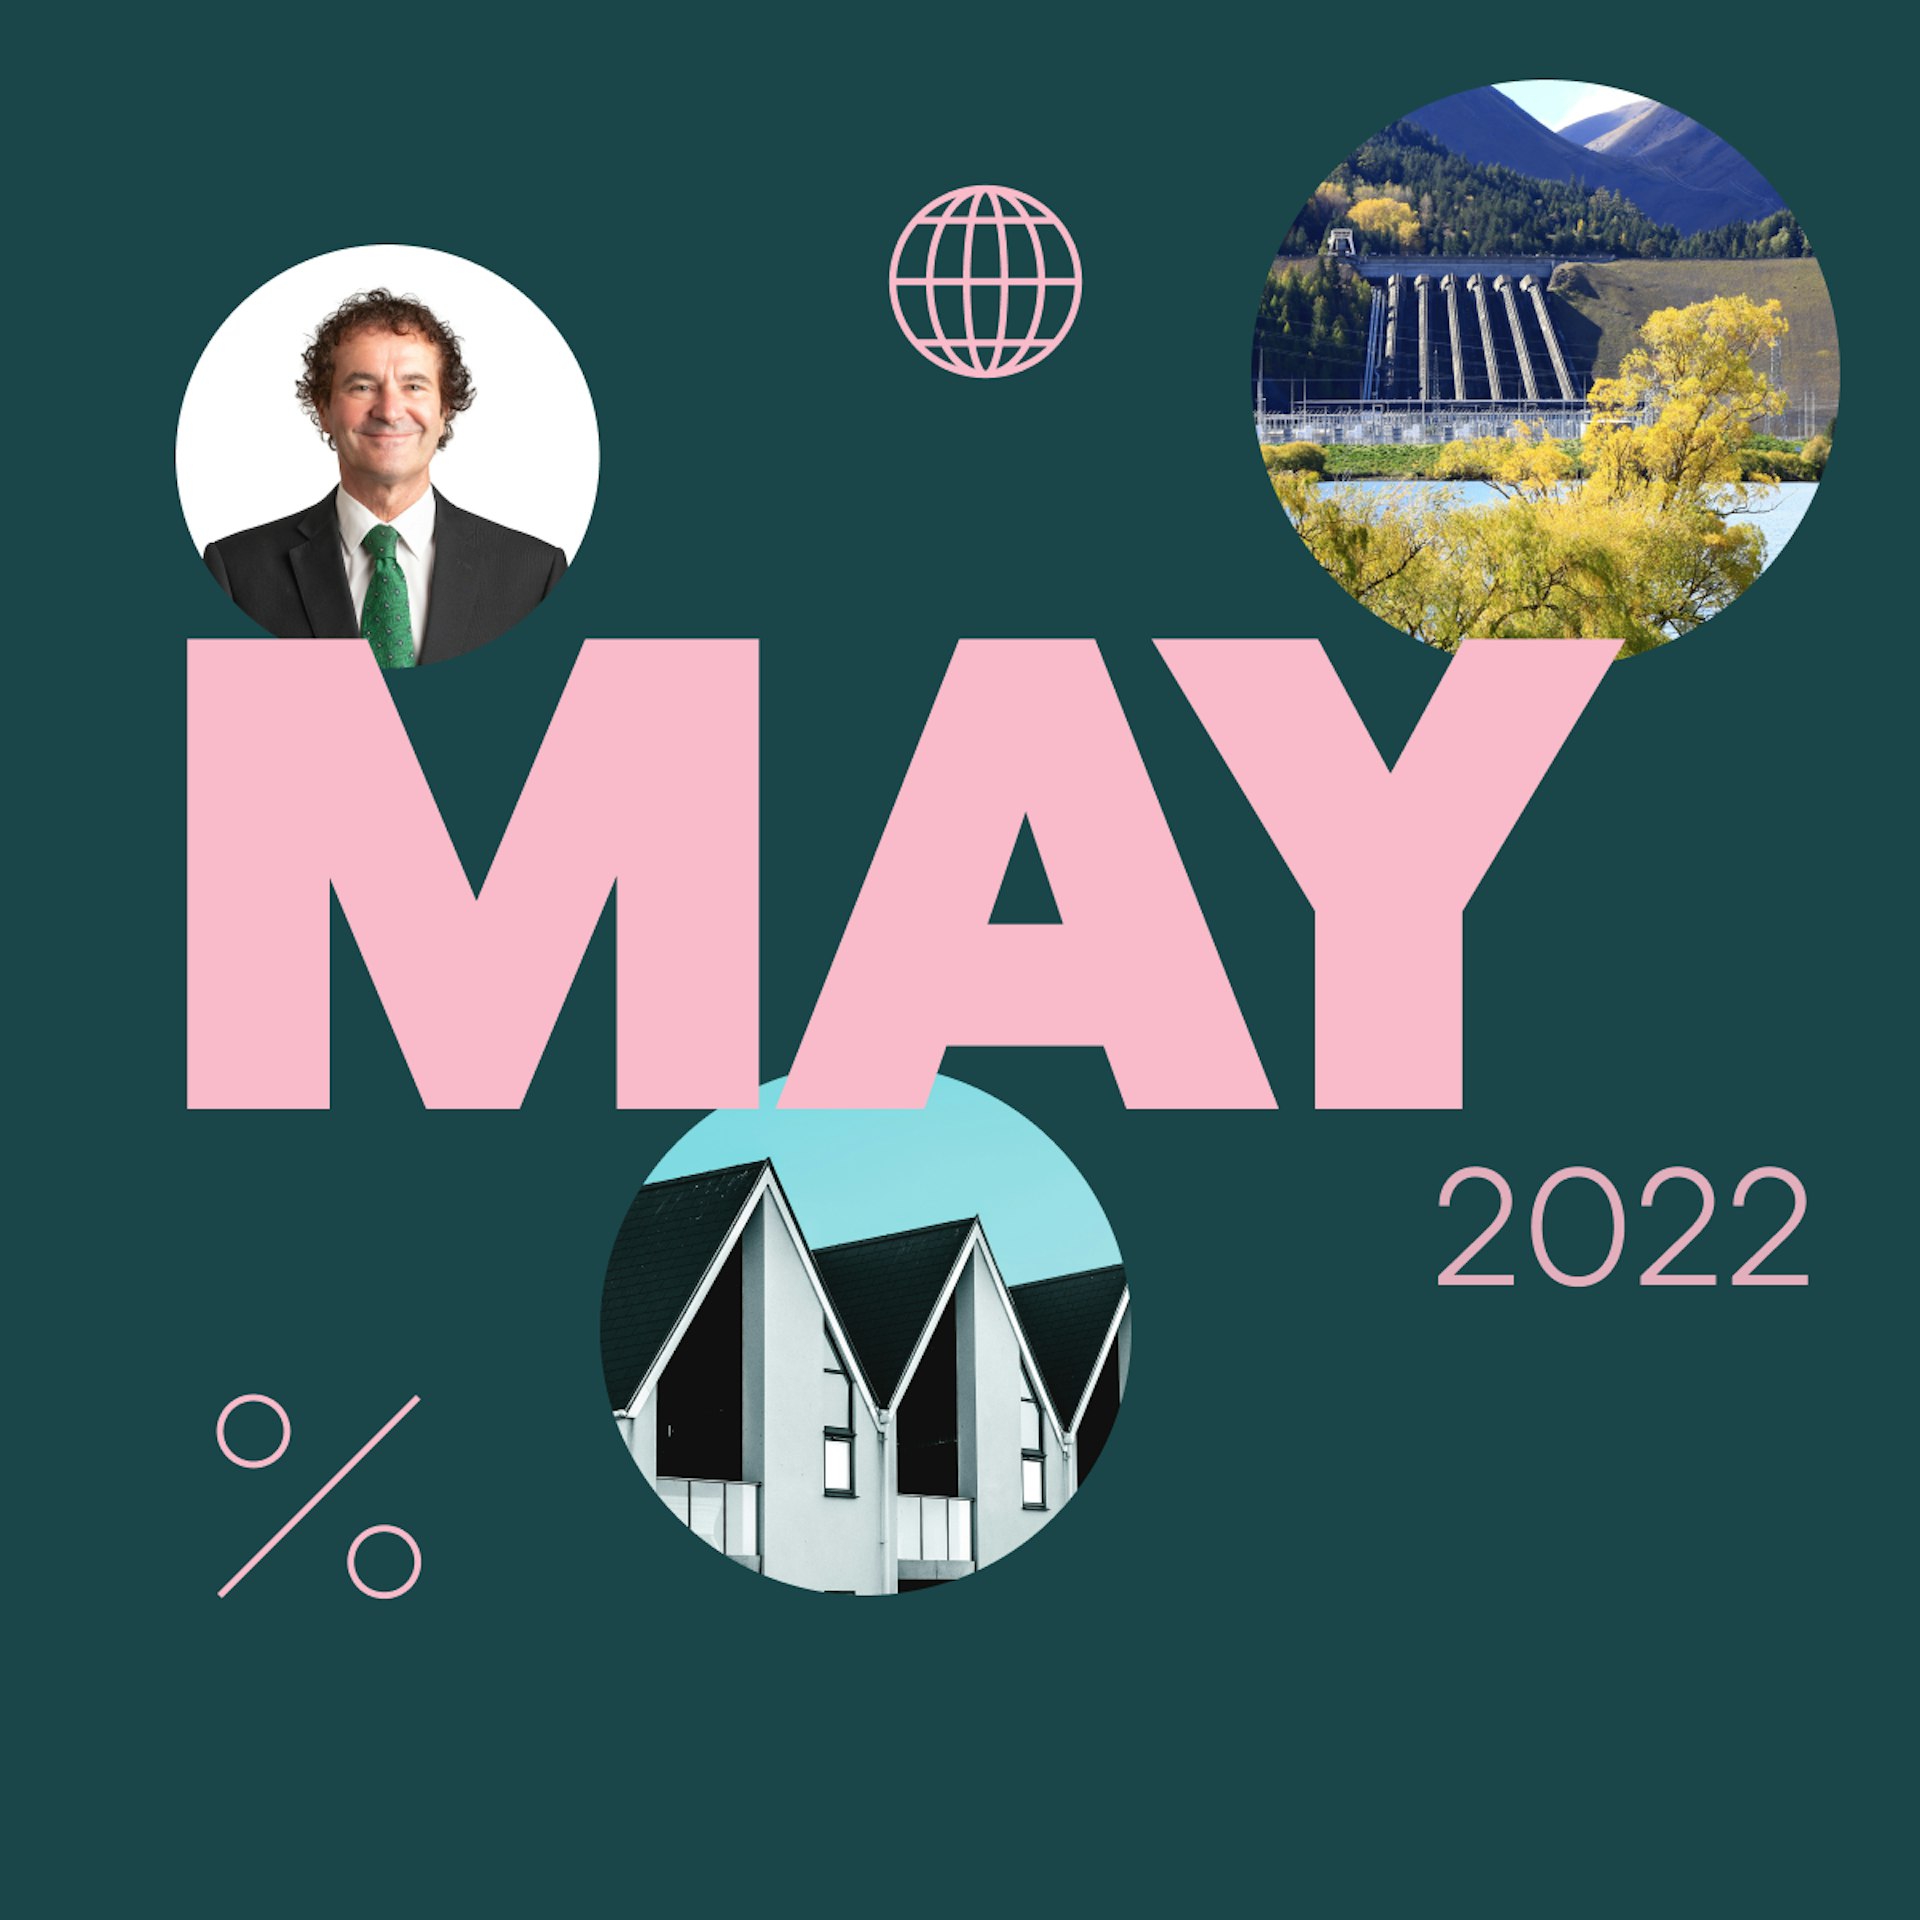 The cover image features the word May in big pink text in the middle of a dark green background. On the top right is an inset circular photo of a hydro plant, below the word May is an inset circular photo of a row of houses, and on the top left is a circular photo of Tony Alexander. In between these are pink line-drawn percentage symbols, a line-drawn globe, and the year 2022. 